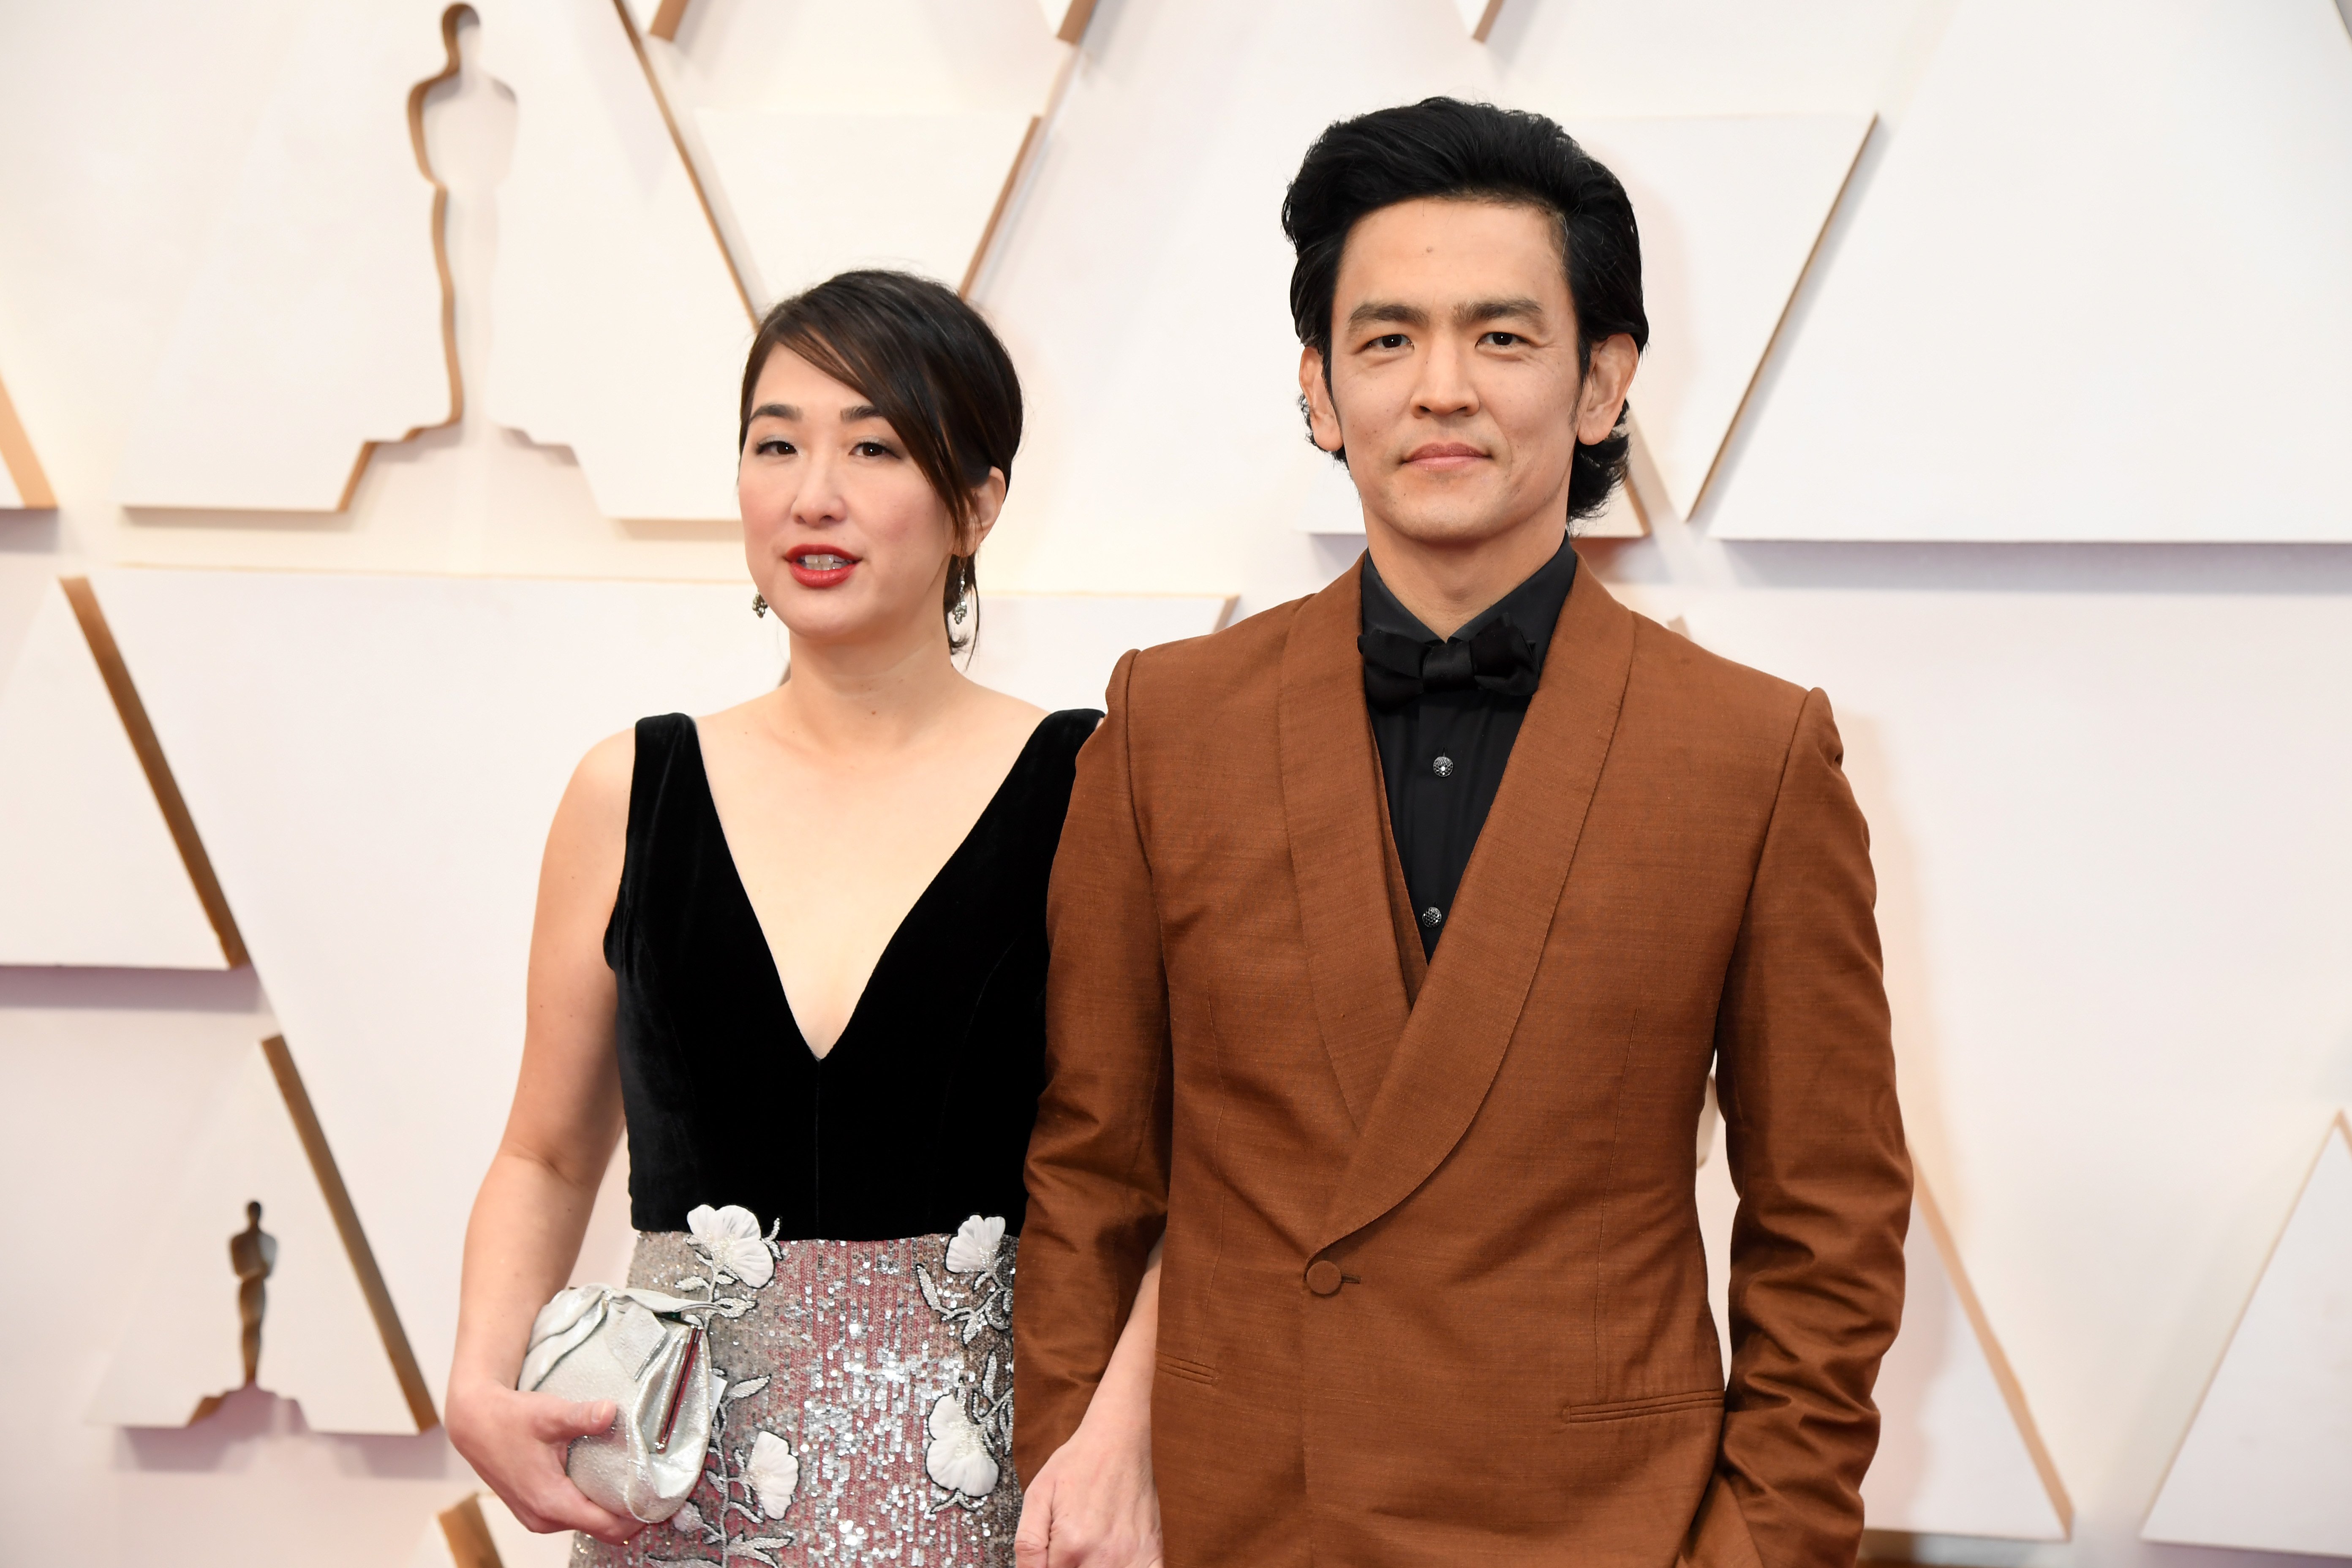 Kerri Higuchi and John Cho at the 92nd Annual Academy Awards in 2020, in Hollywood, California. | Source: Getty Images